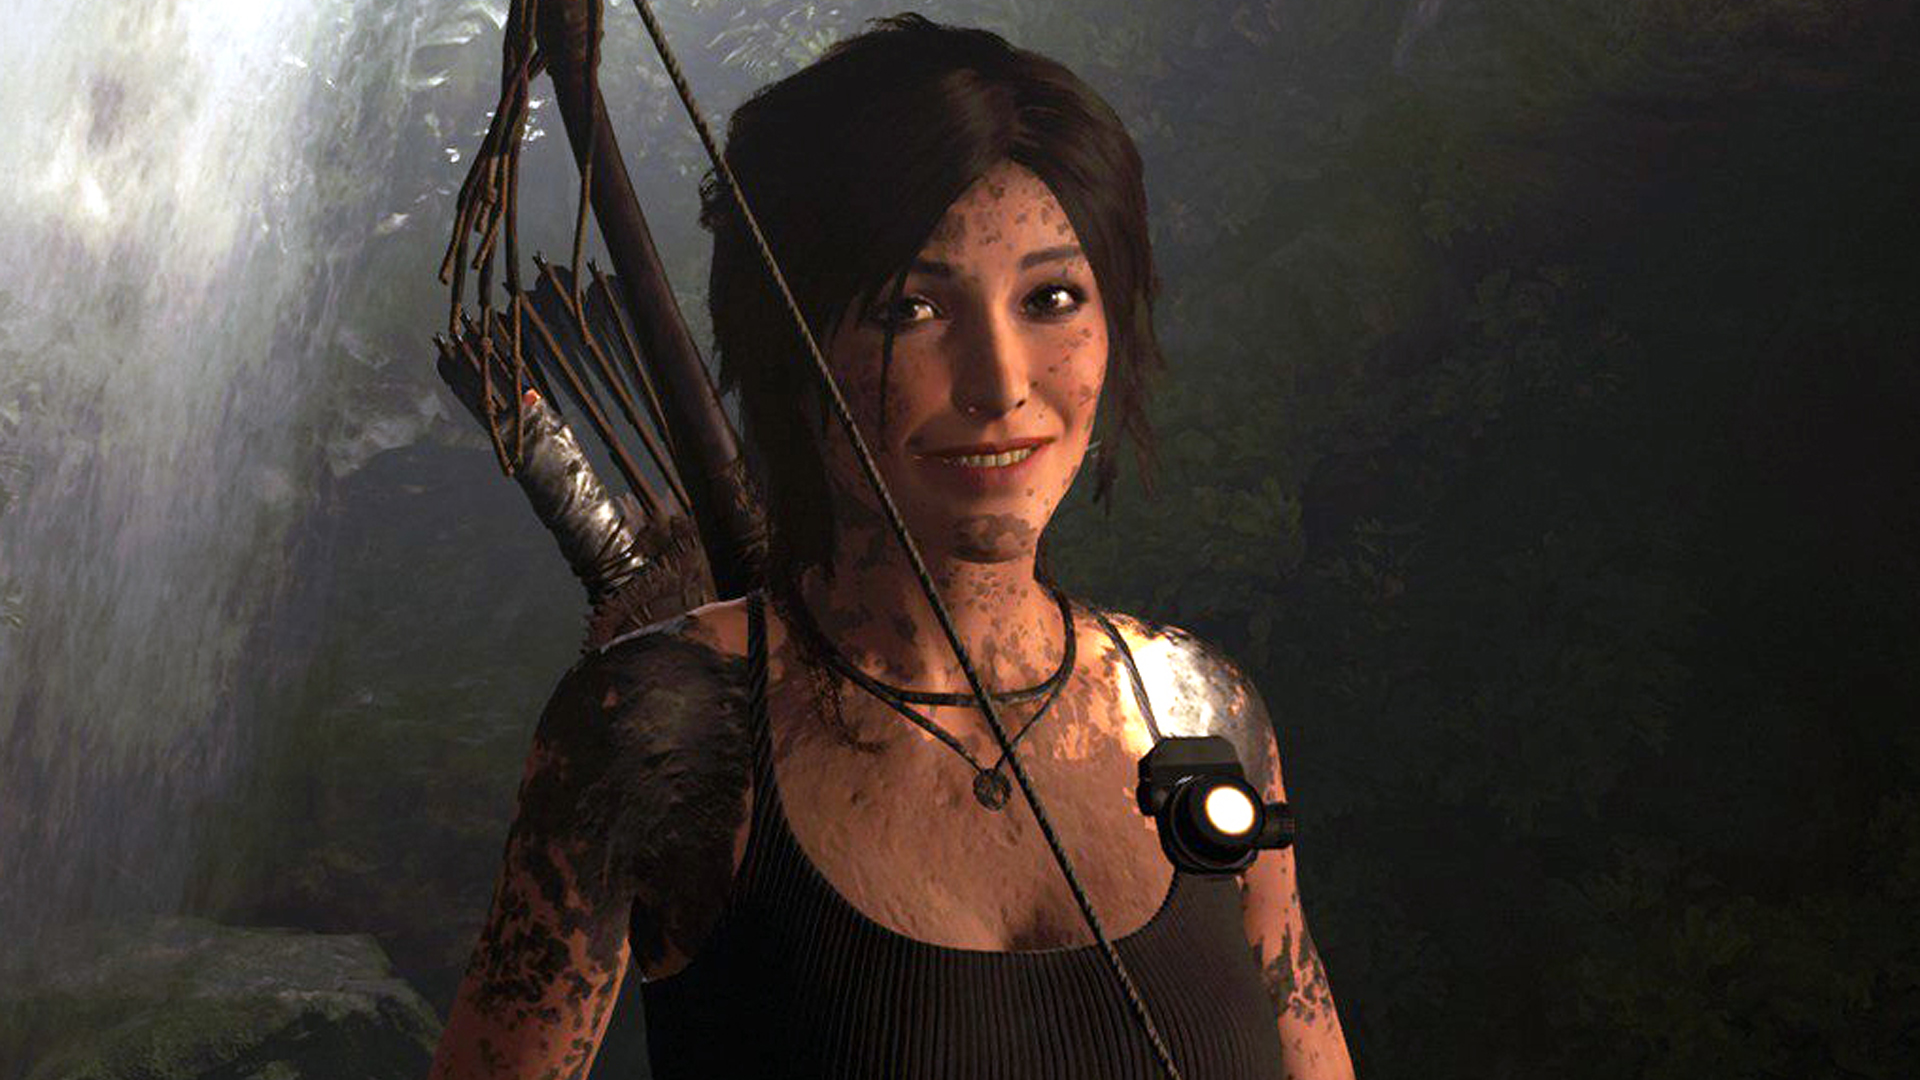 Today’s free Epic game may be the entire Tomb Raider trilogy, gasp